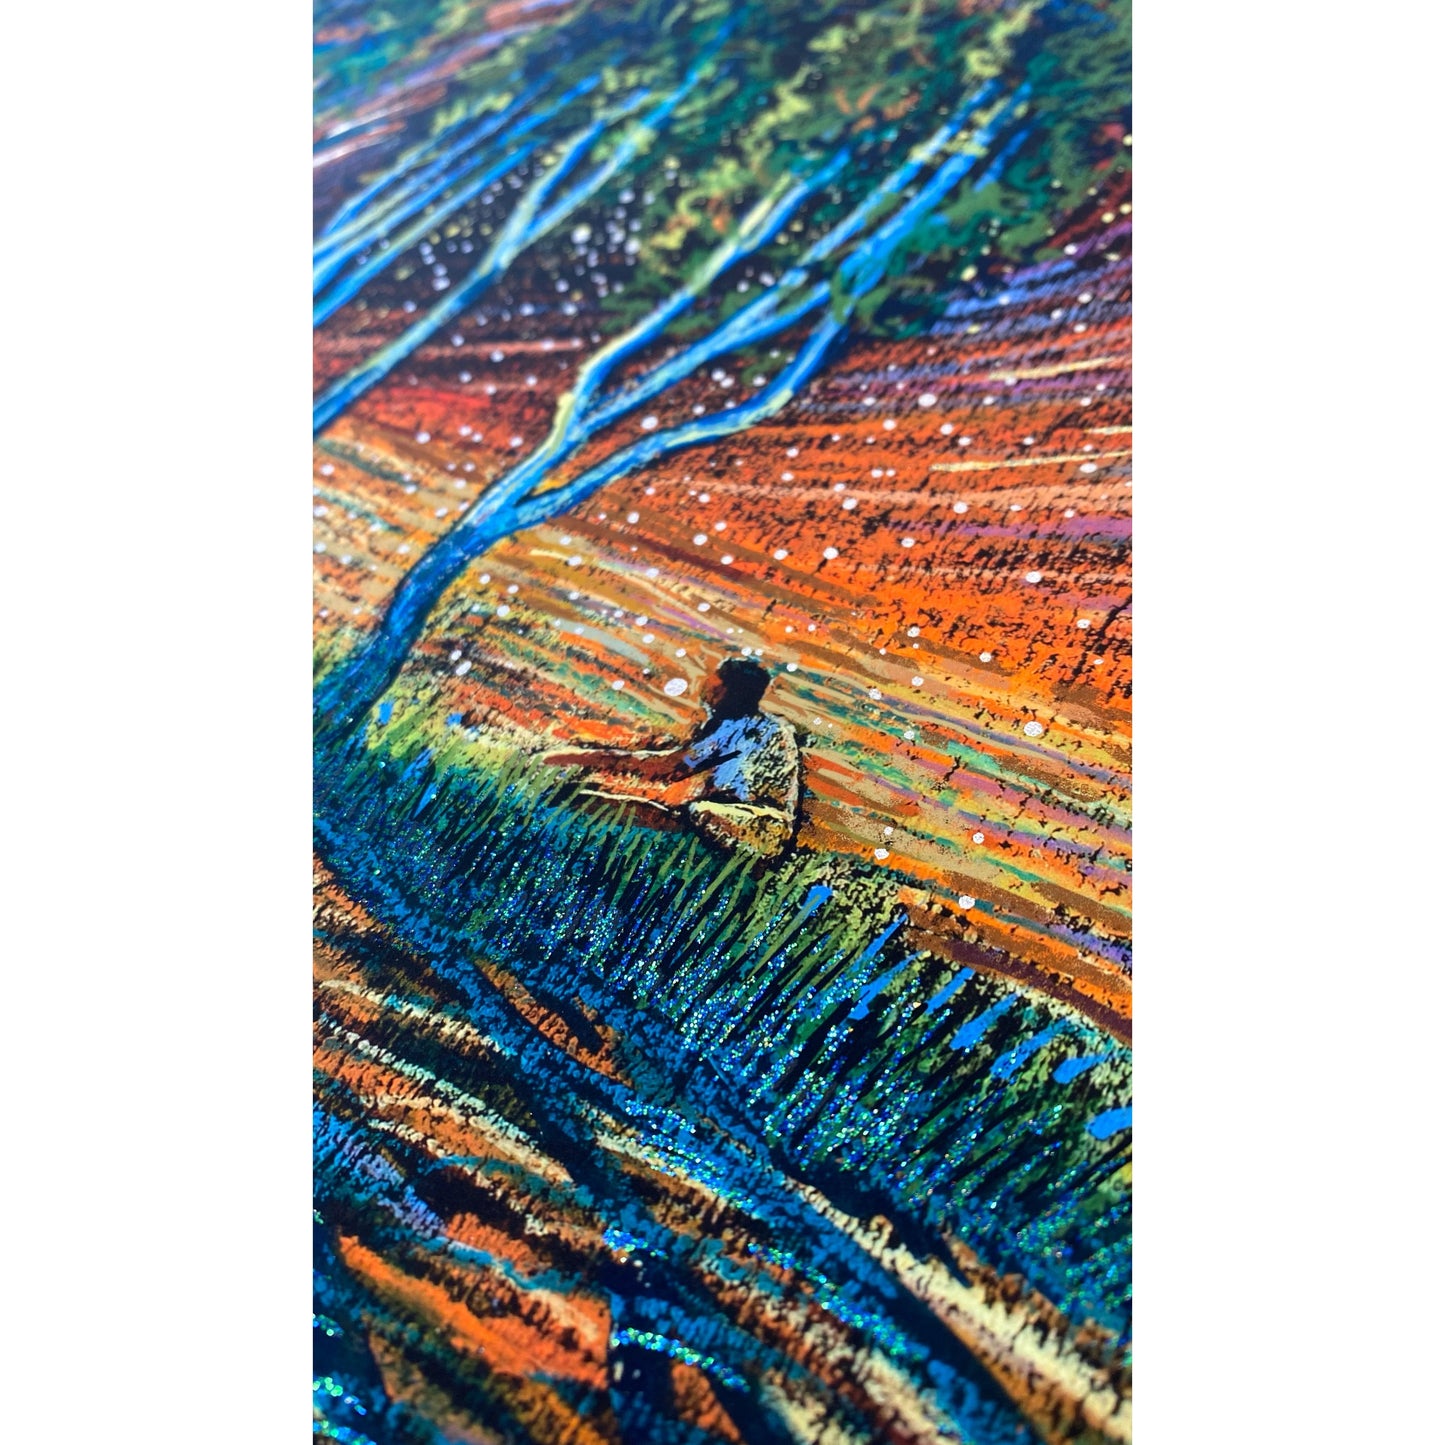 The Smallness in Everything (MP) Print James R. Eads 